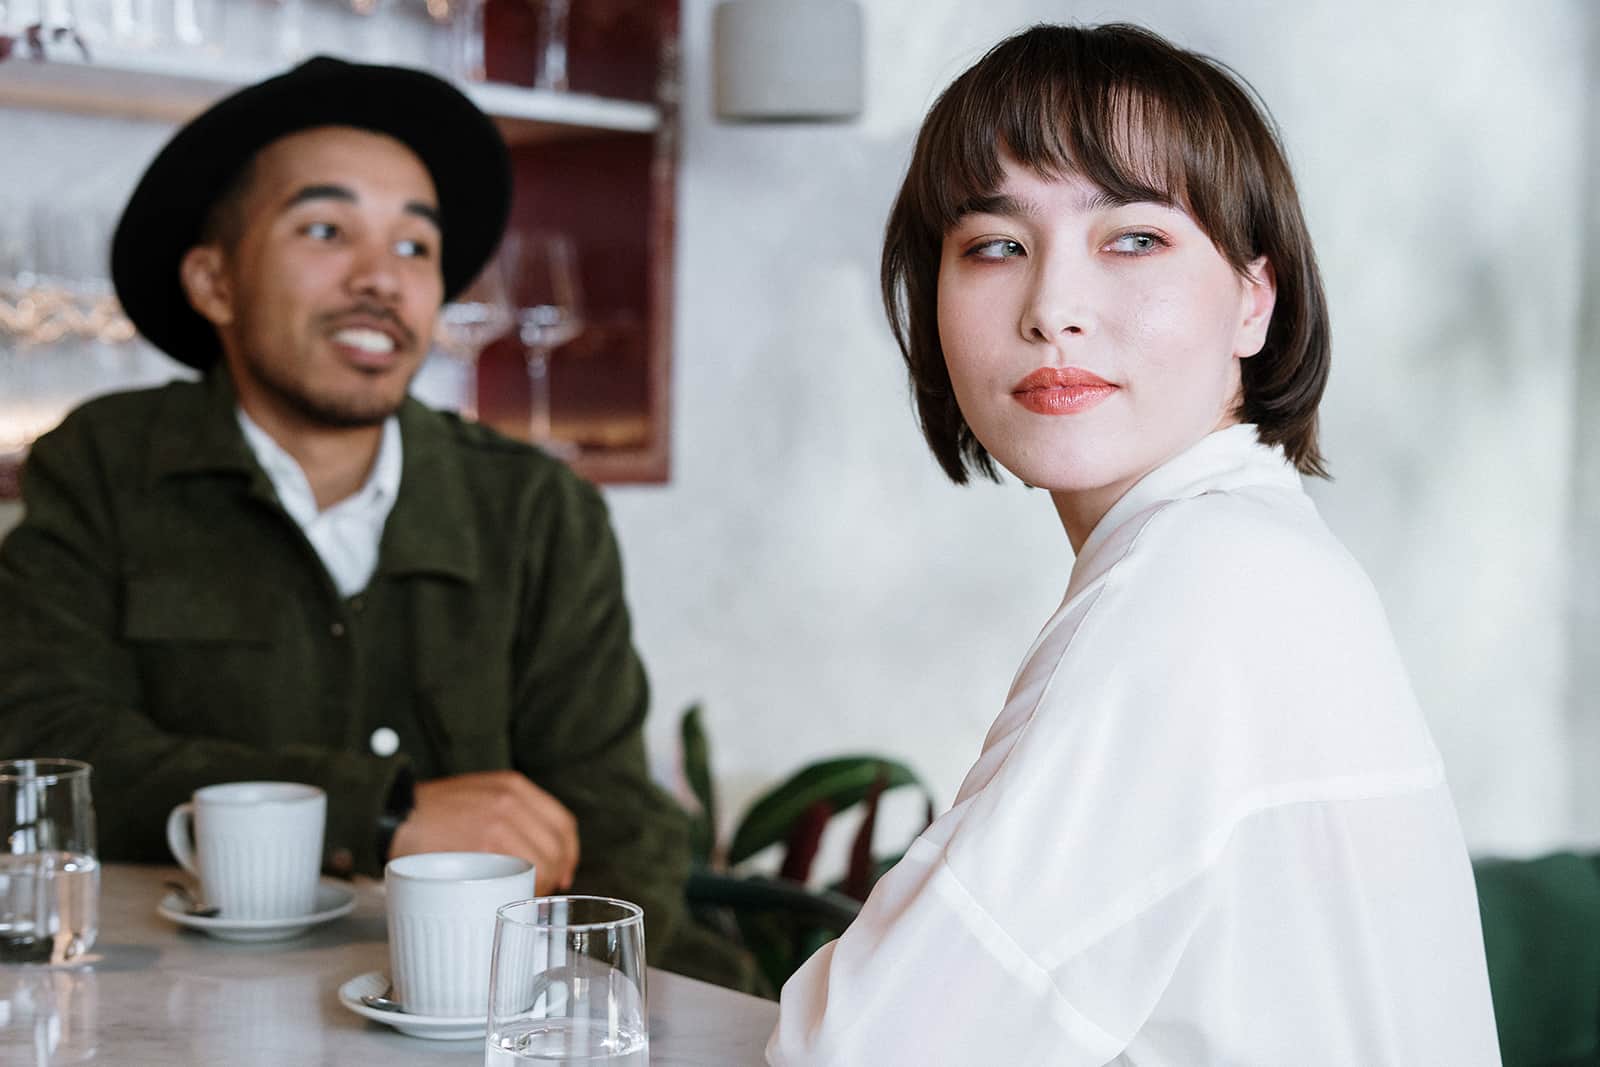 pensive woman sitting with a man in a cafe on a date